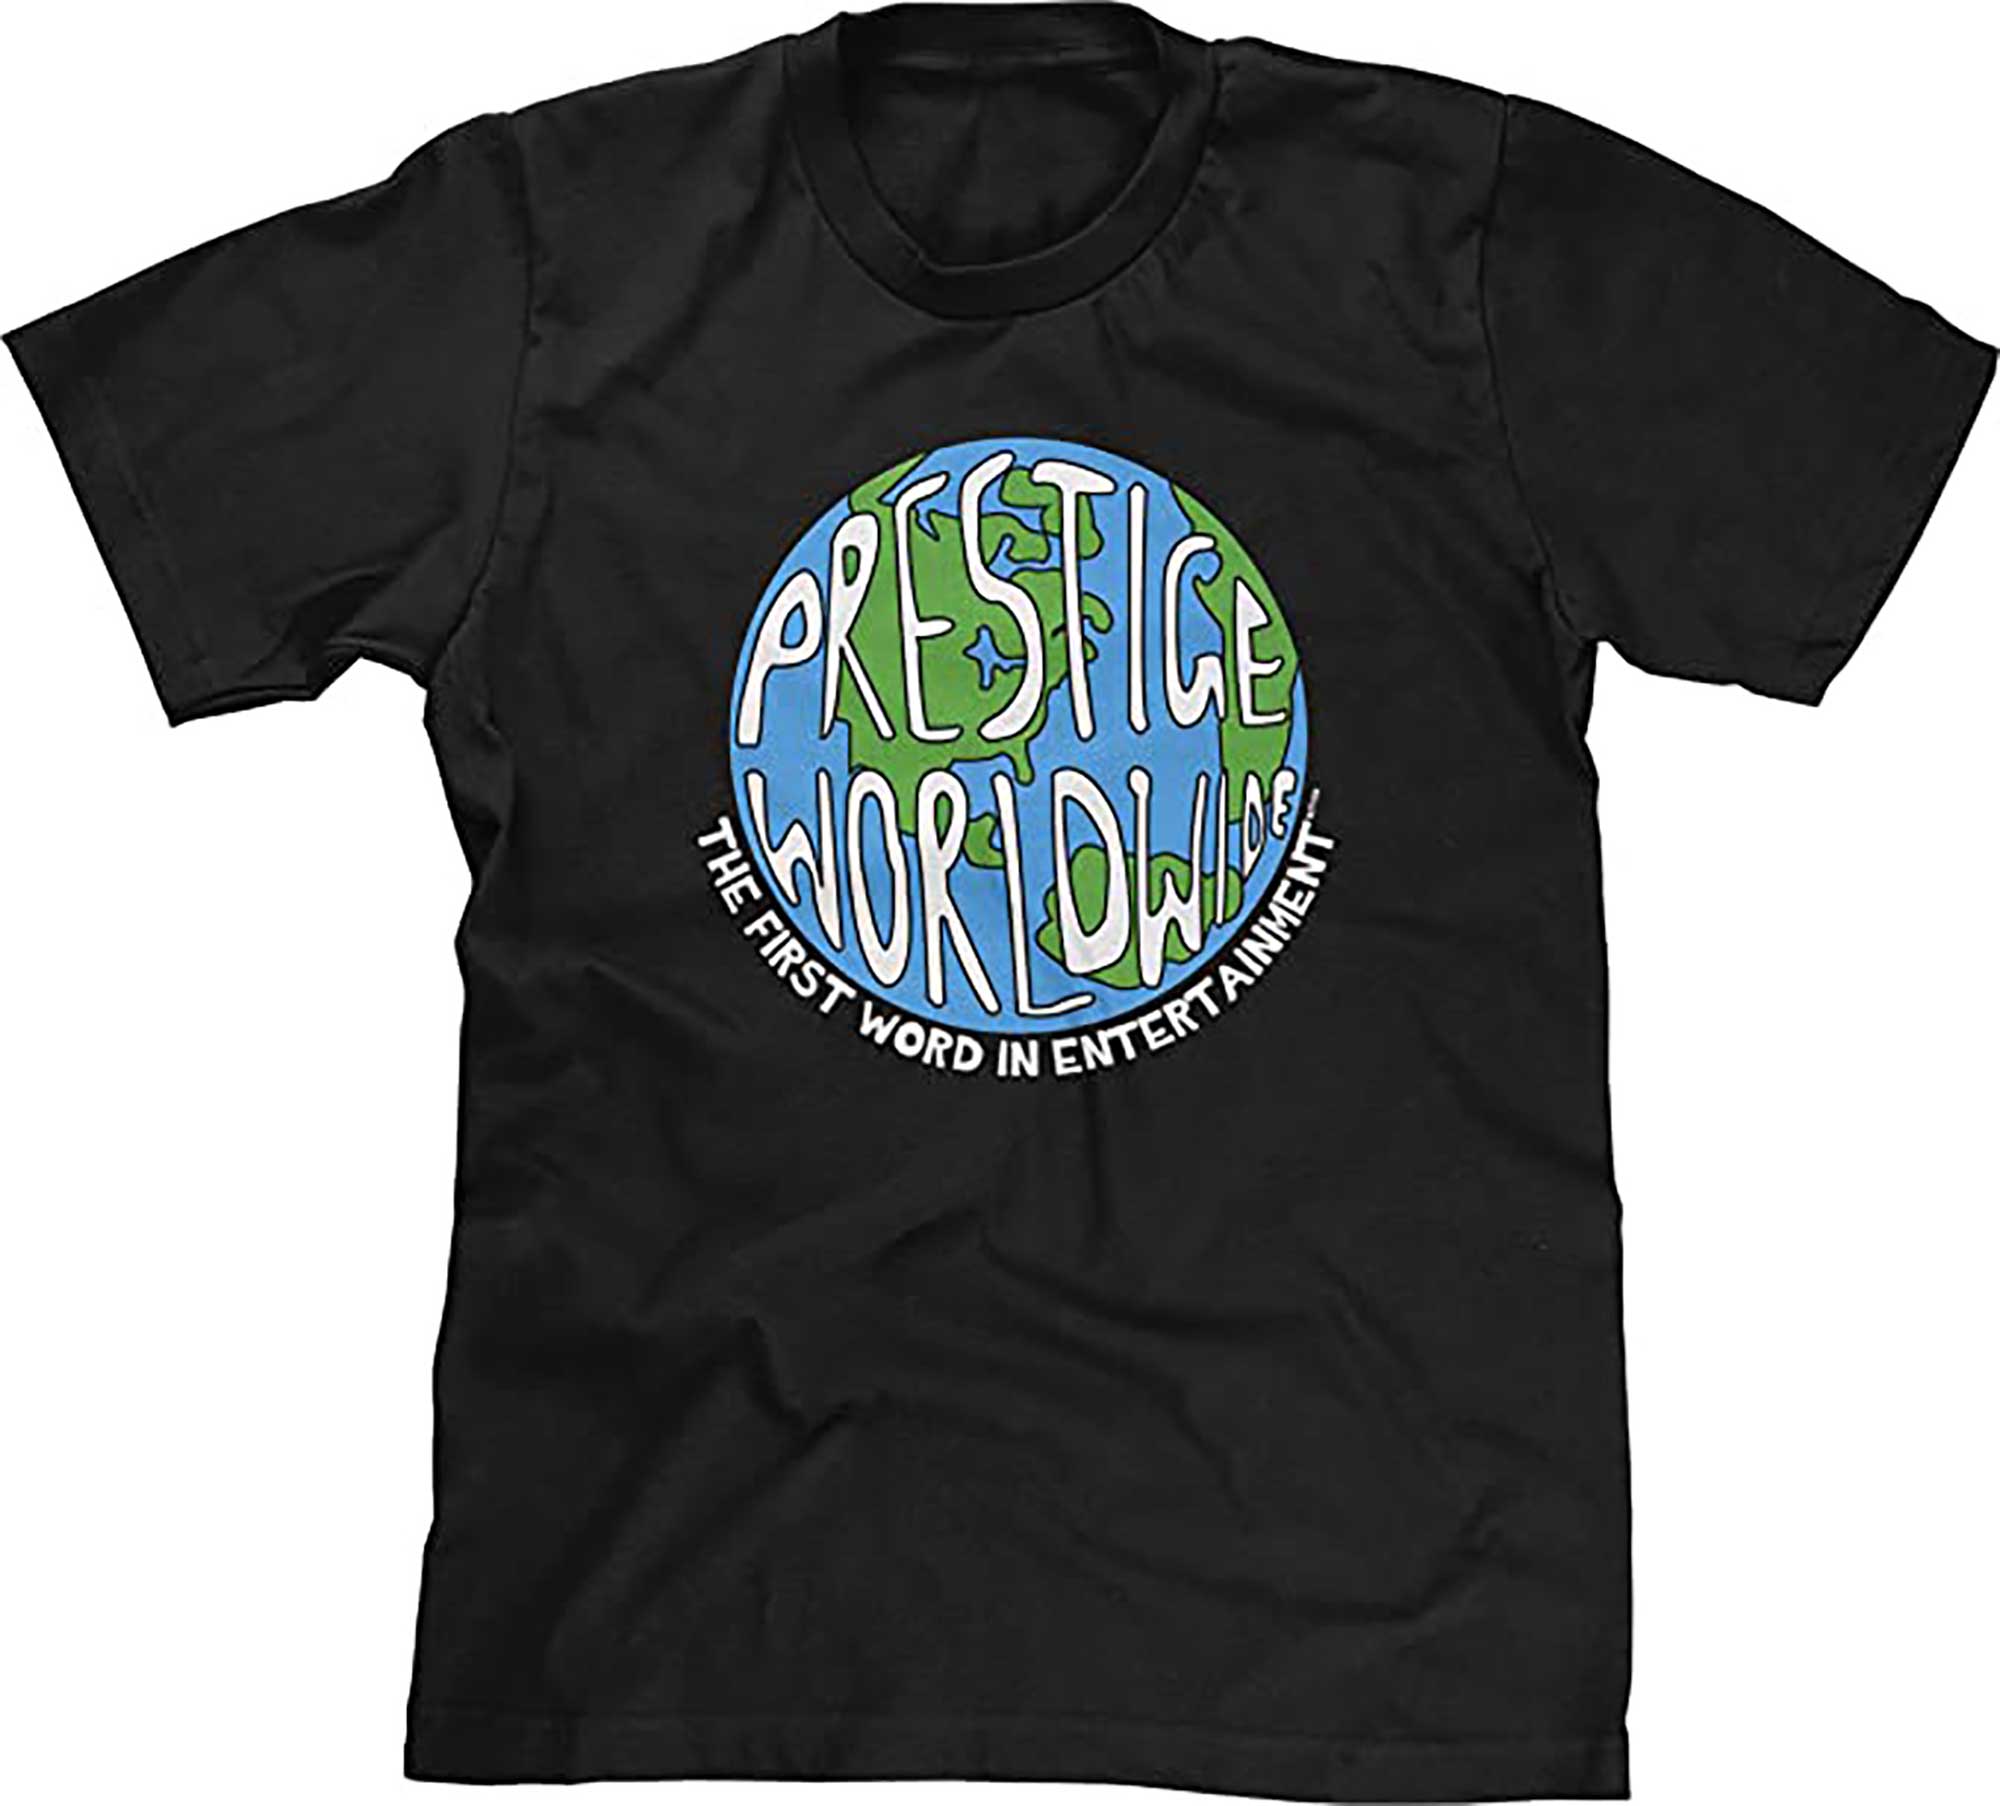 Skitongifts Prestige Worldwide The First Word In Entertaiment Mens T Shirt